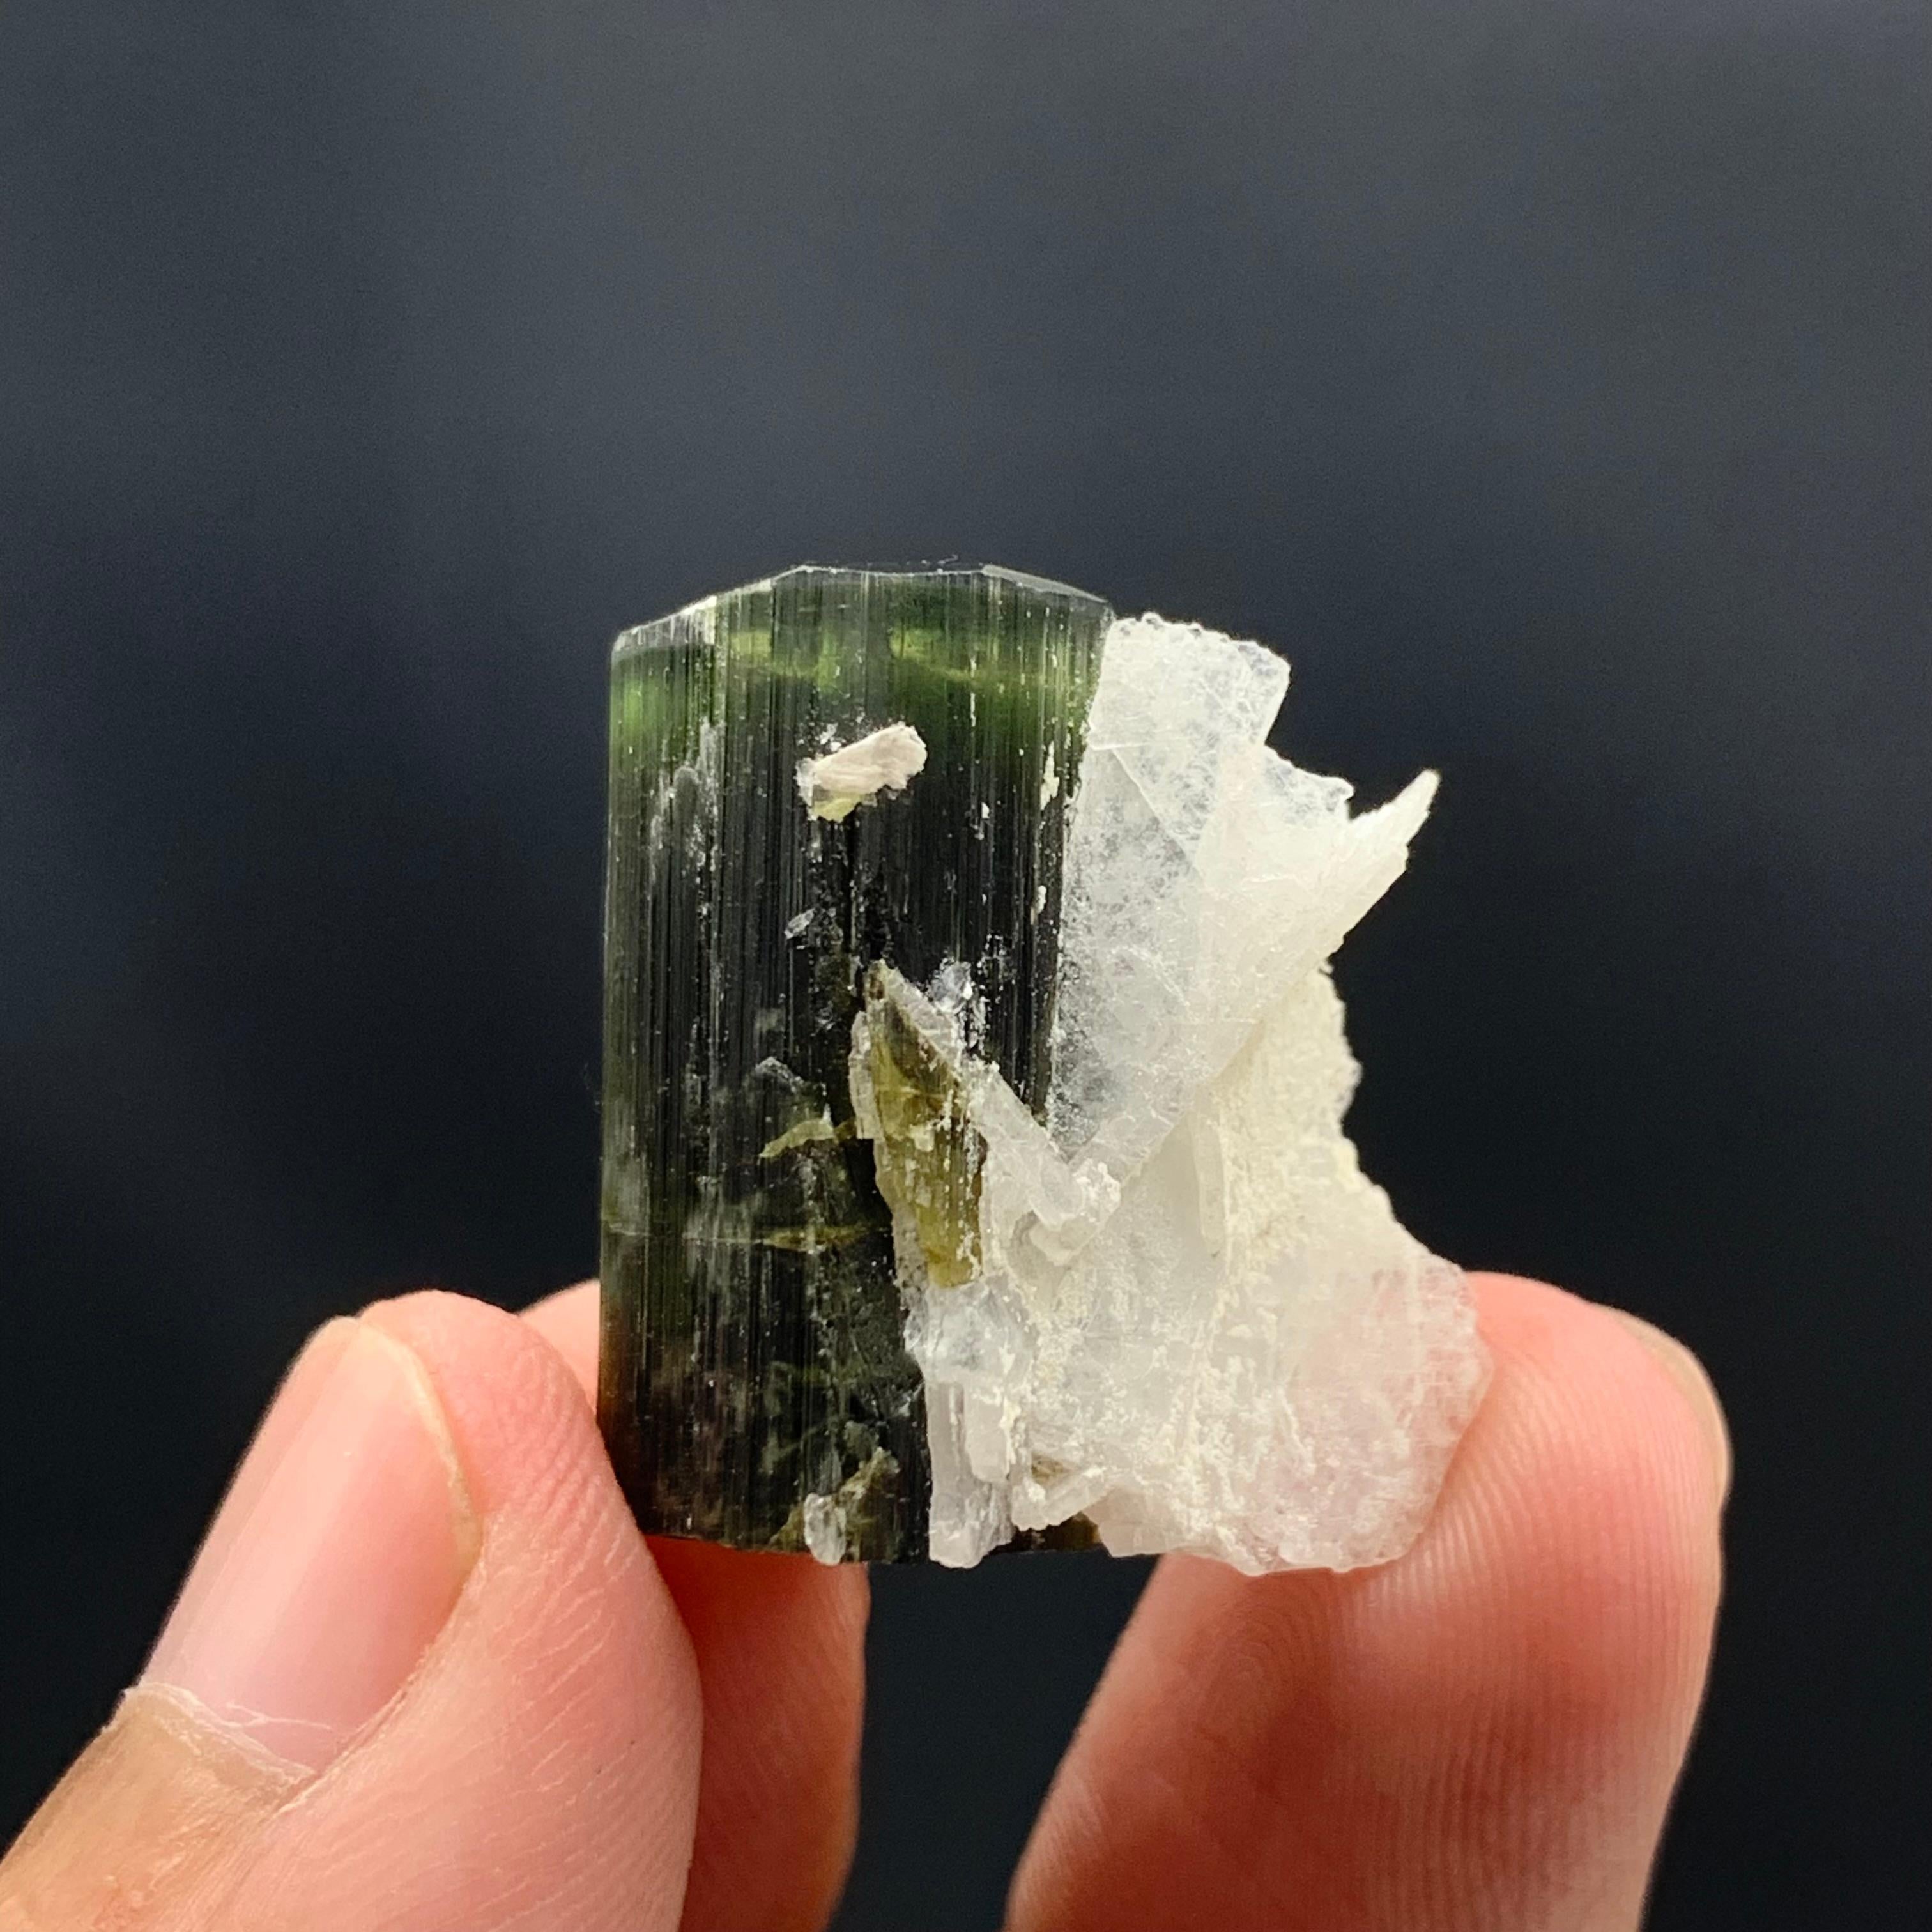 46.95 Cts Lovely Tourmaline With Albite Specimen From Stak Nala Valley, Pakistan For Sale 4